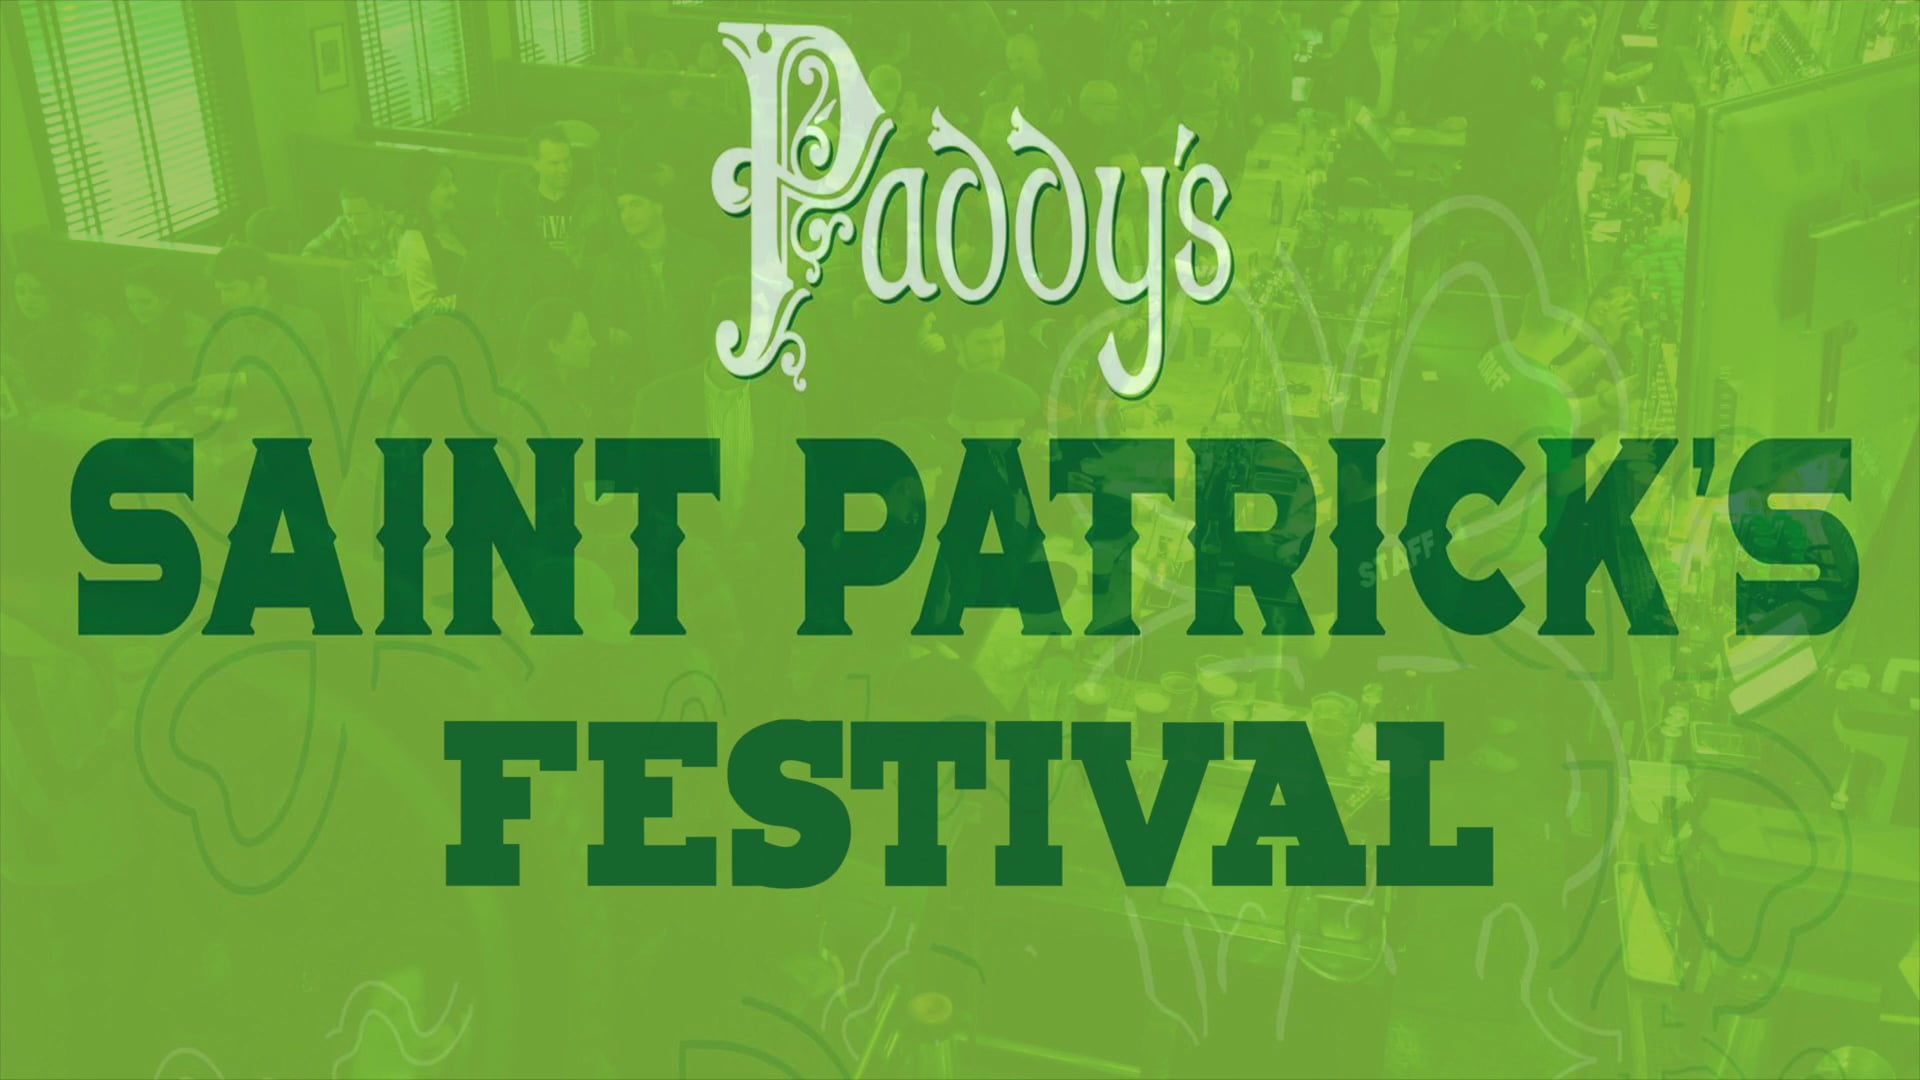 Paddy's Bar & Grill - St. Patrick's Festival